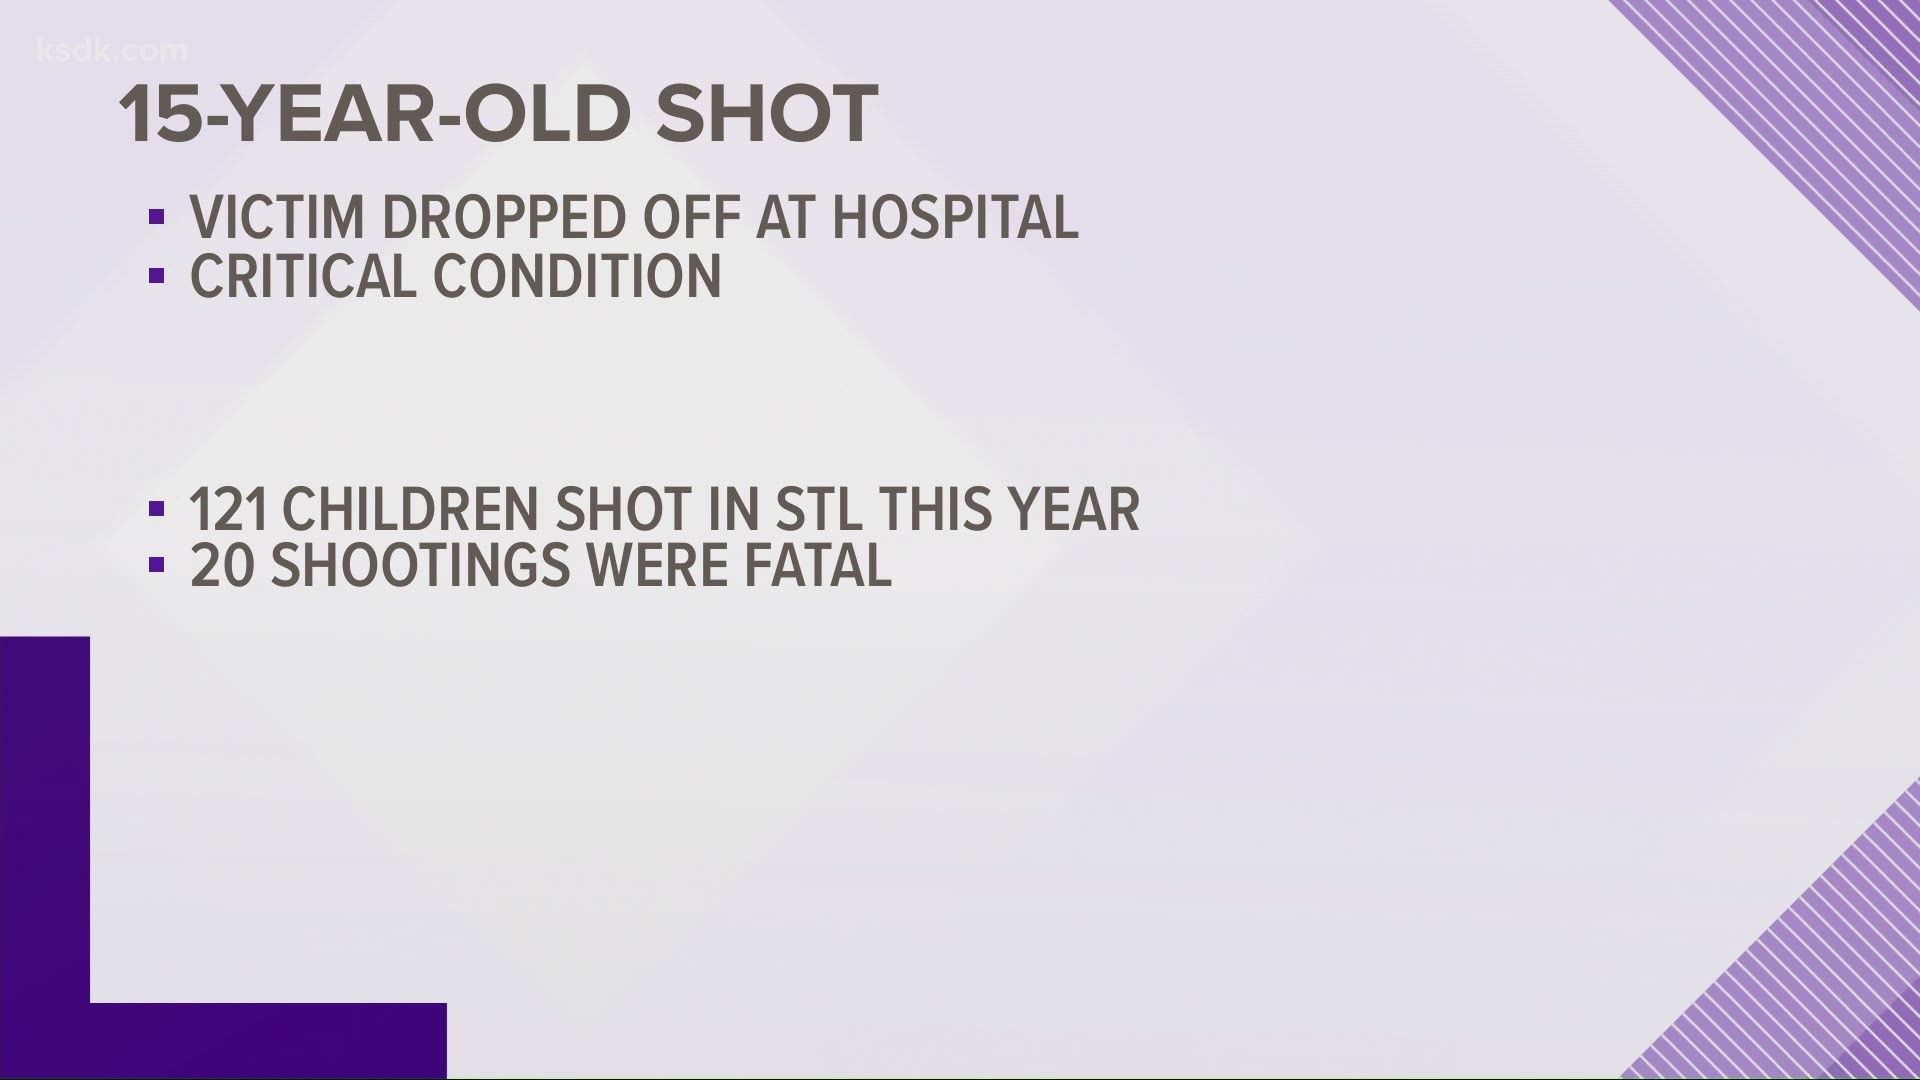 The boy was dropped off at an area hospital with a gunshot wound to his back